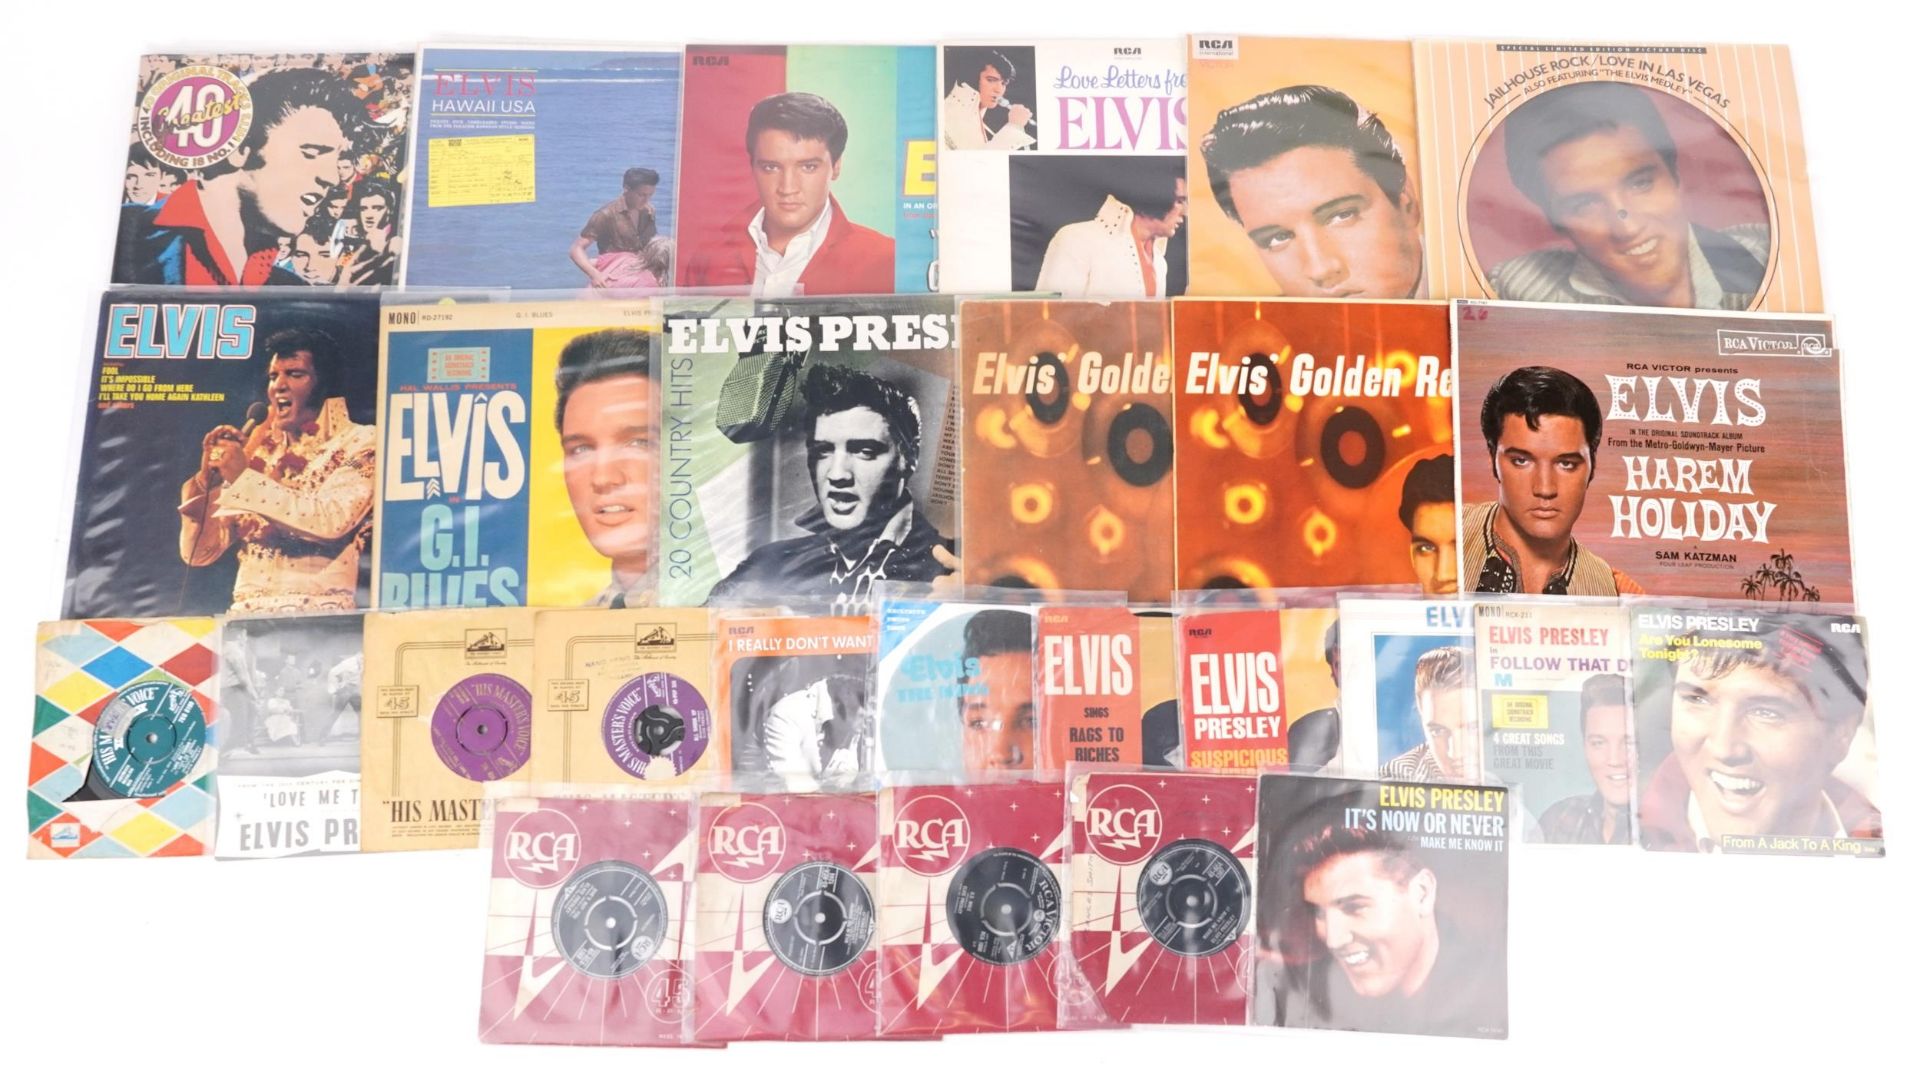 Elvis Presley vinyl LP records and 45rpms including Kissing Cousins, Hawaii USA and Golden Records